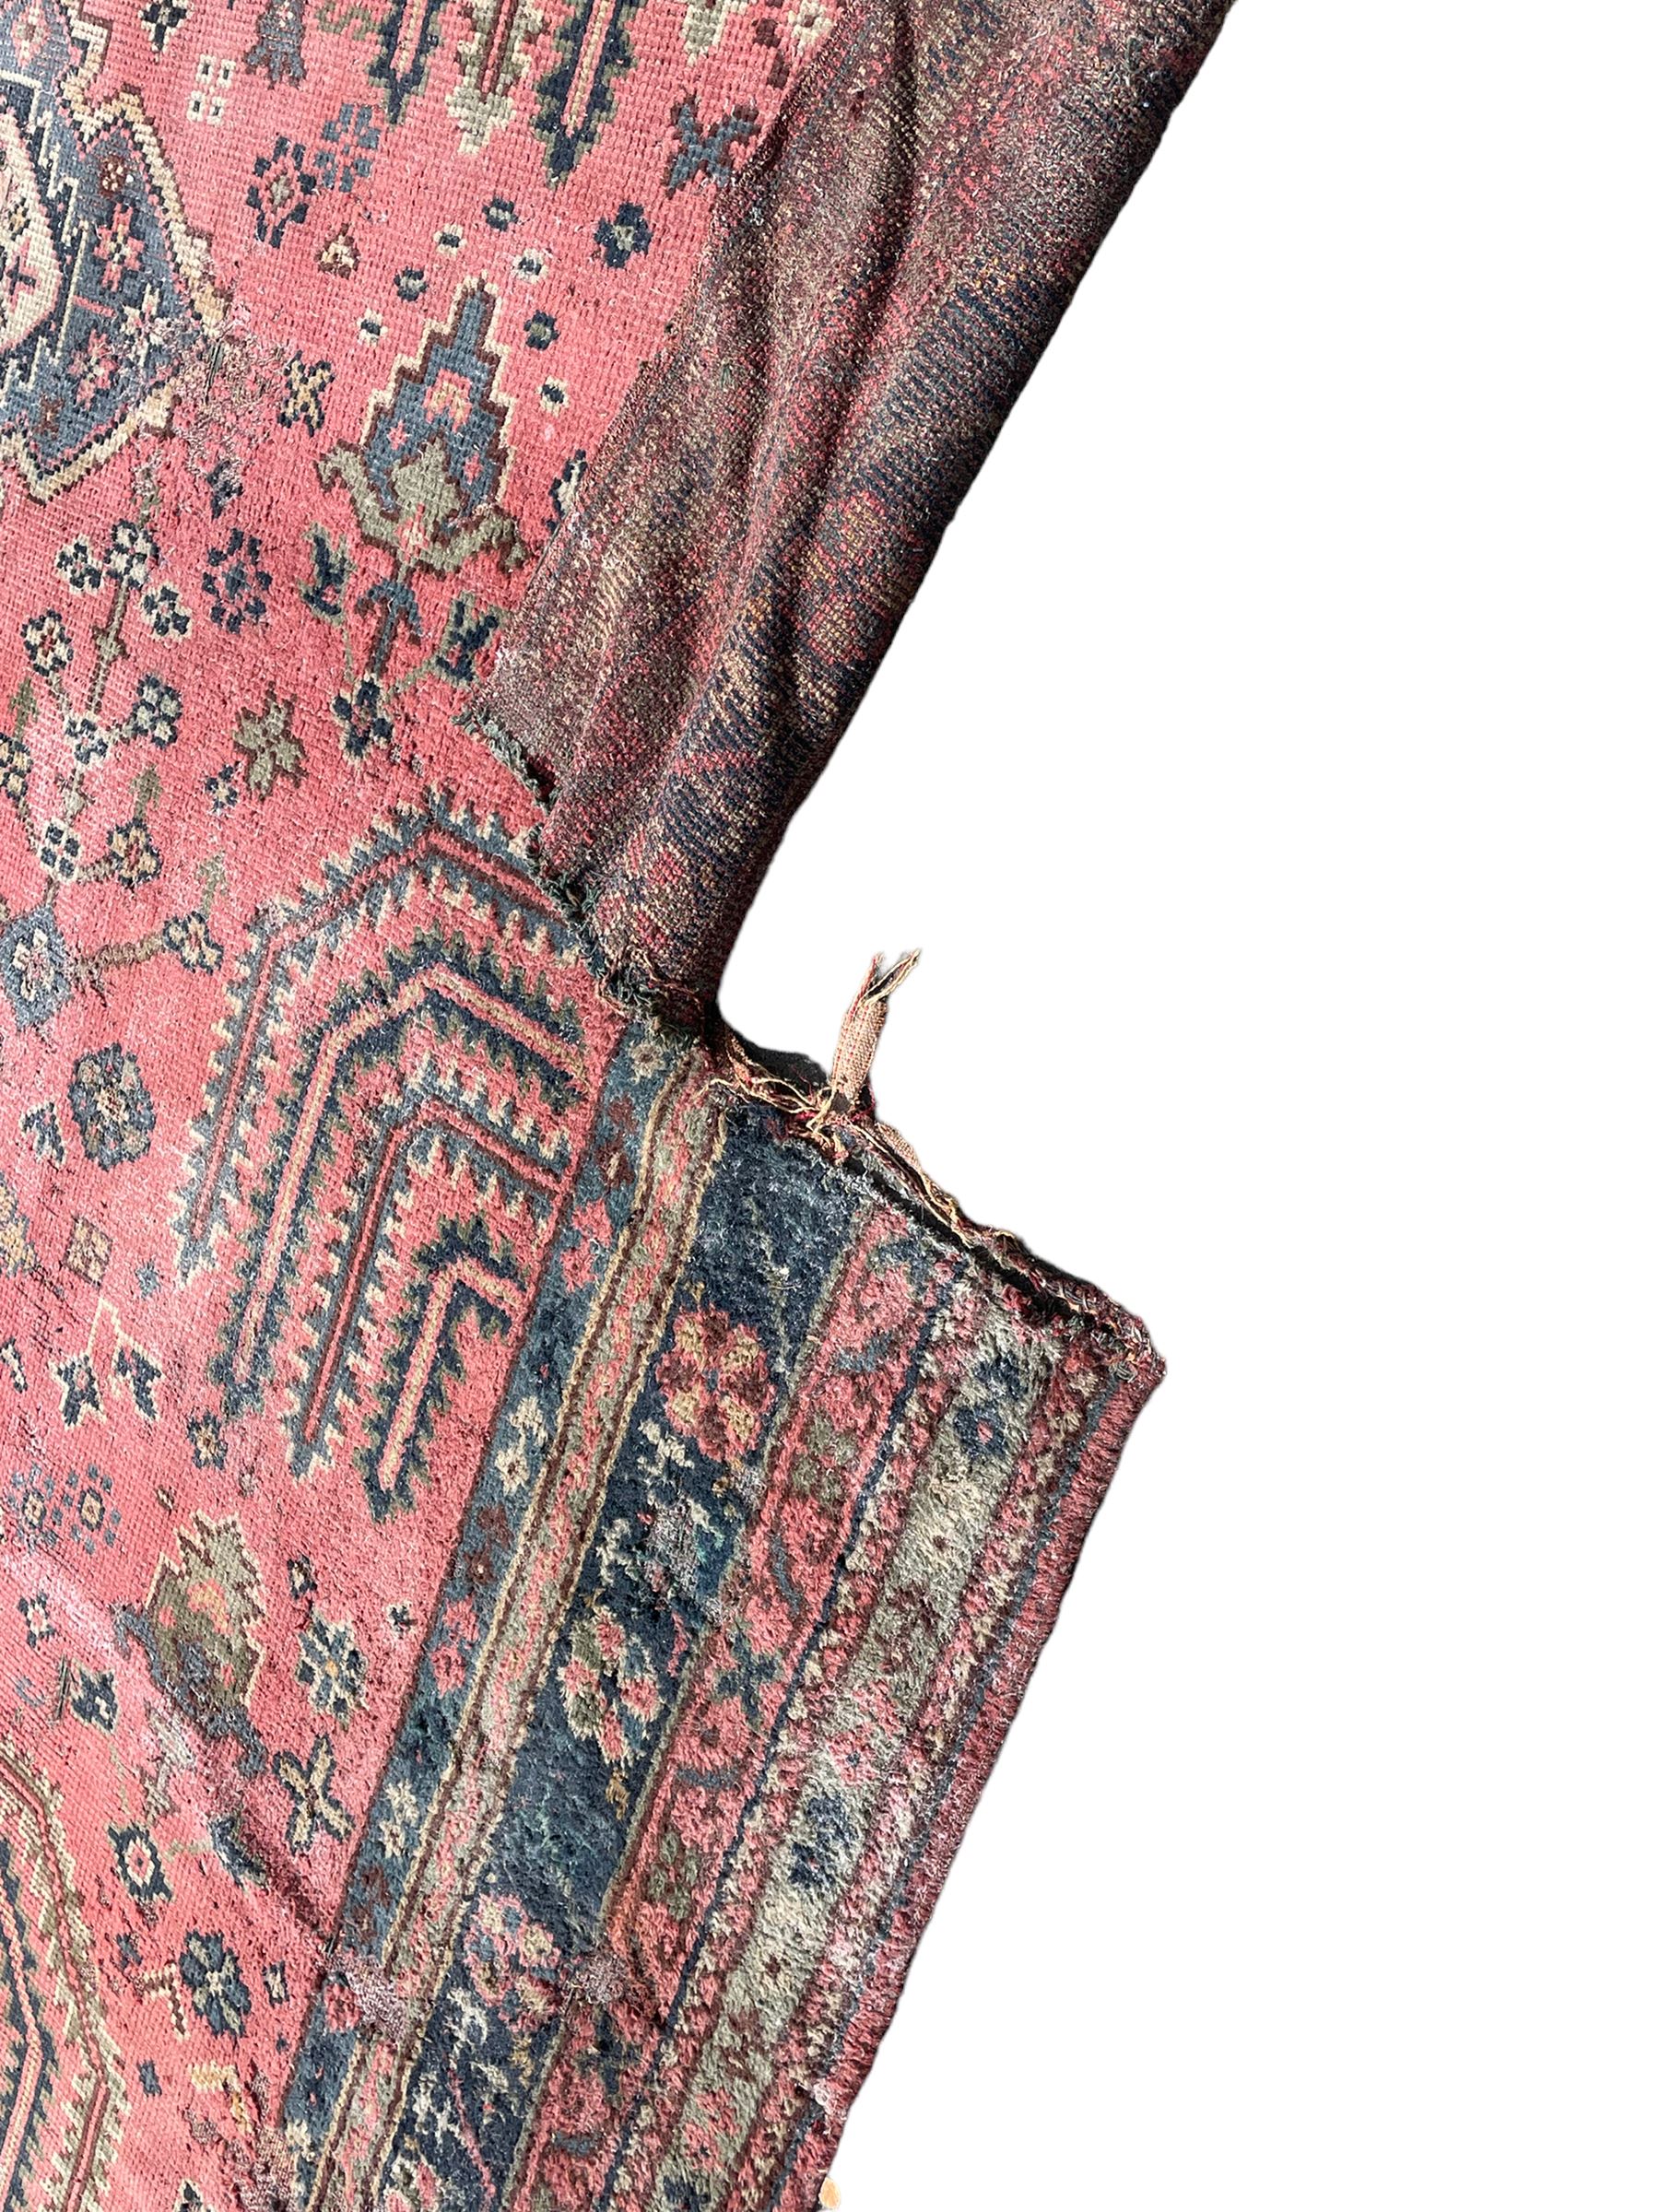 Large early 20th century Turkish red ground carpet - Image 10 of 13